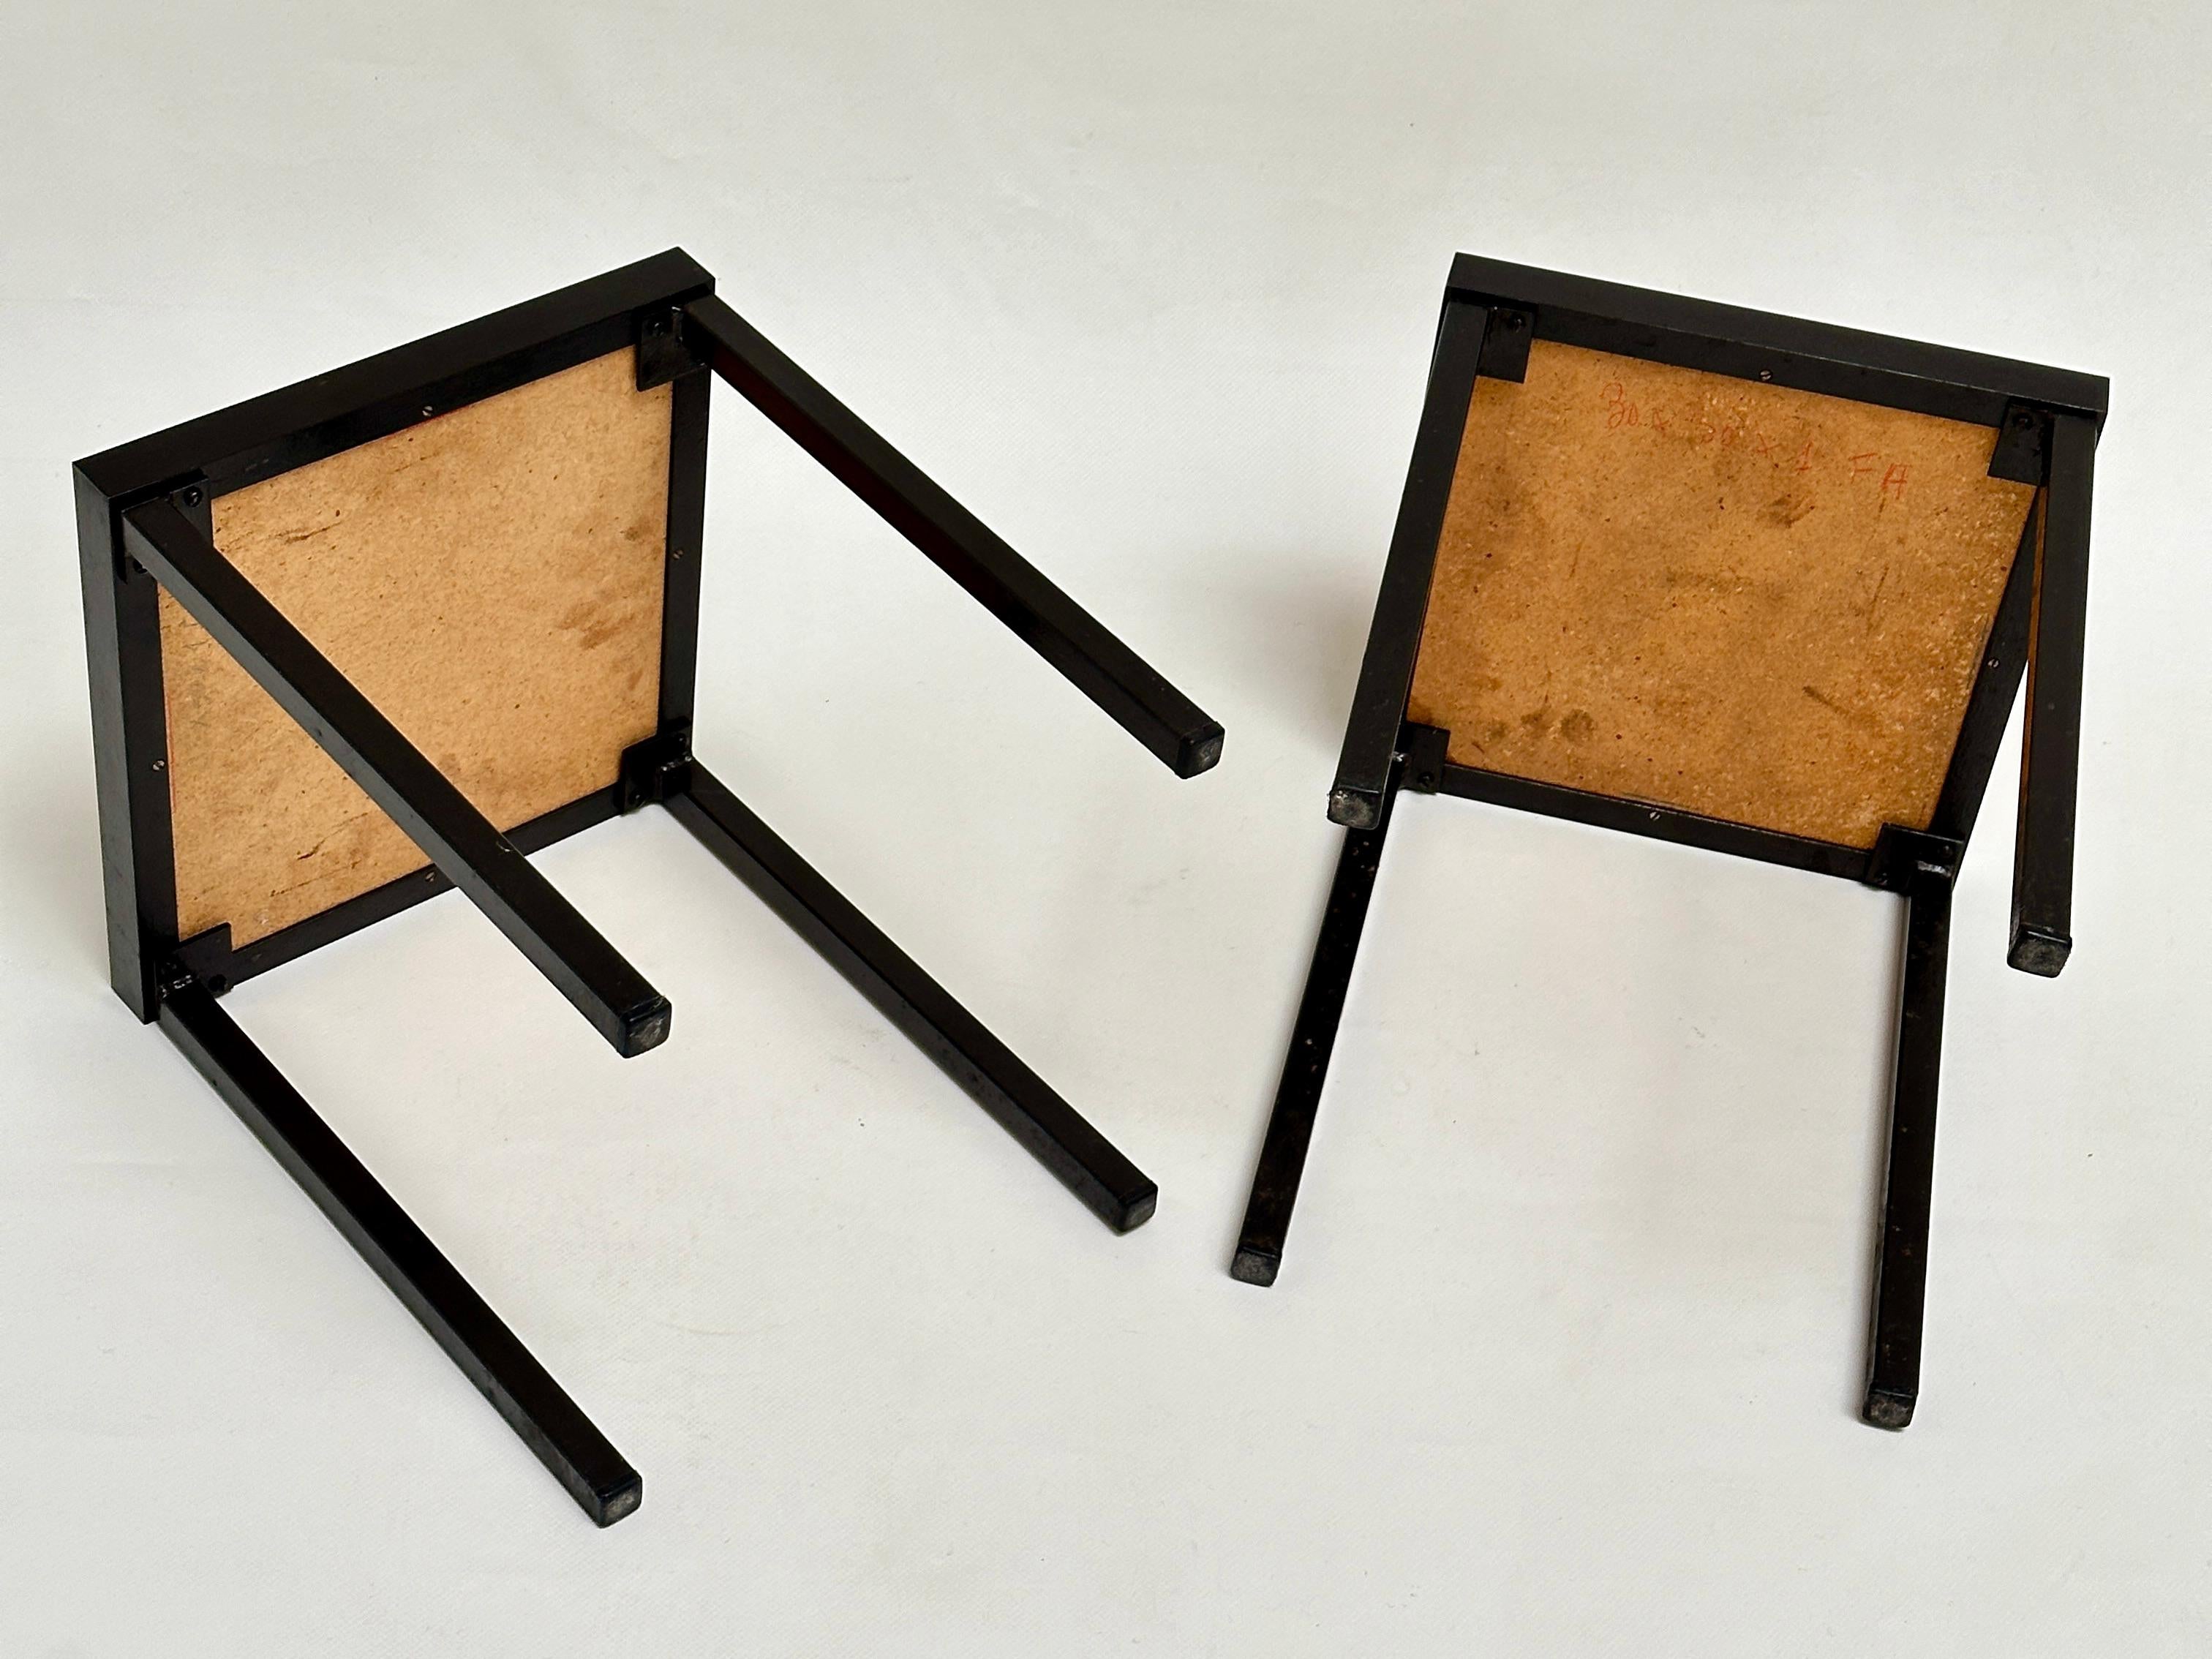 Pair of Low Tables, Roger Capron, Vallauris, c. 1965 For Sale 1